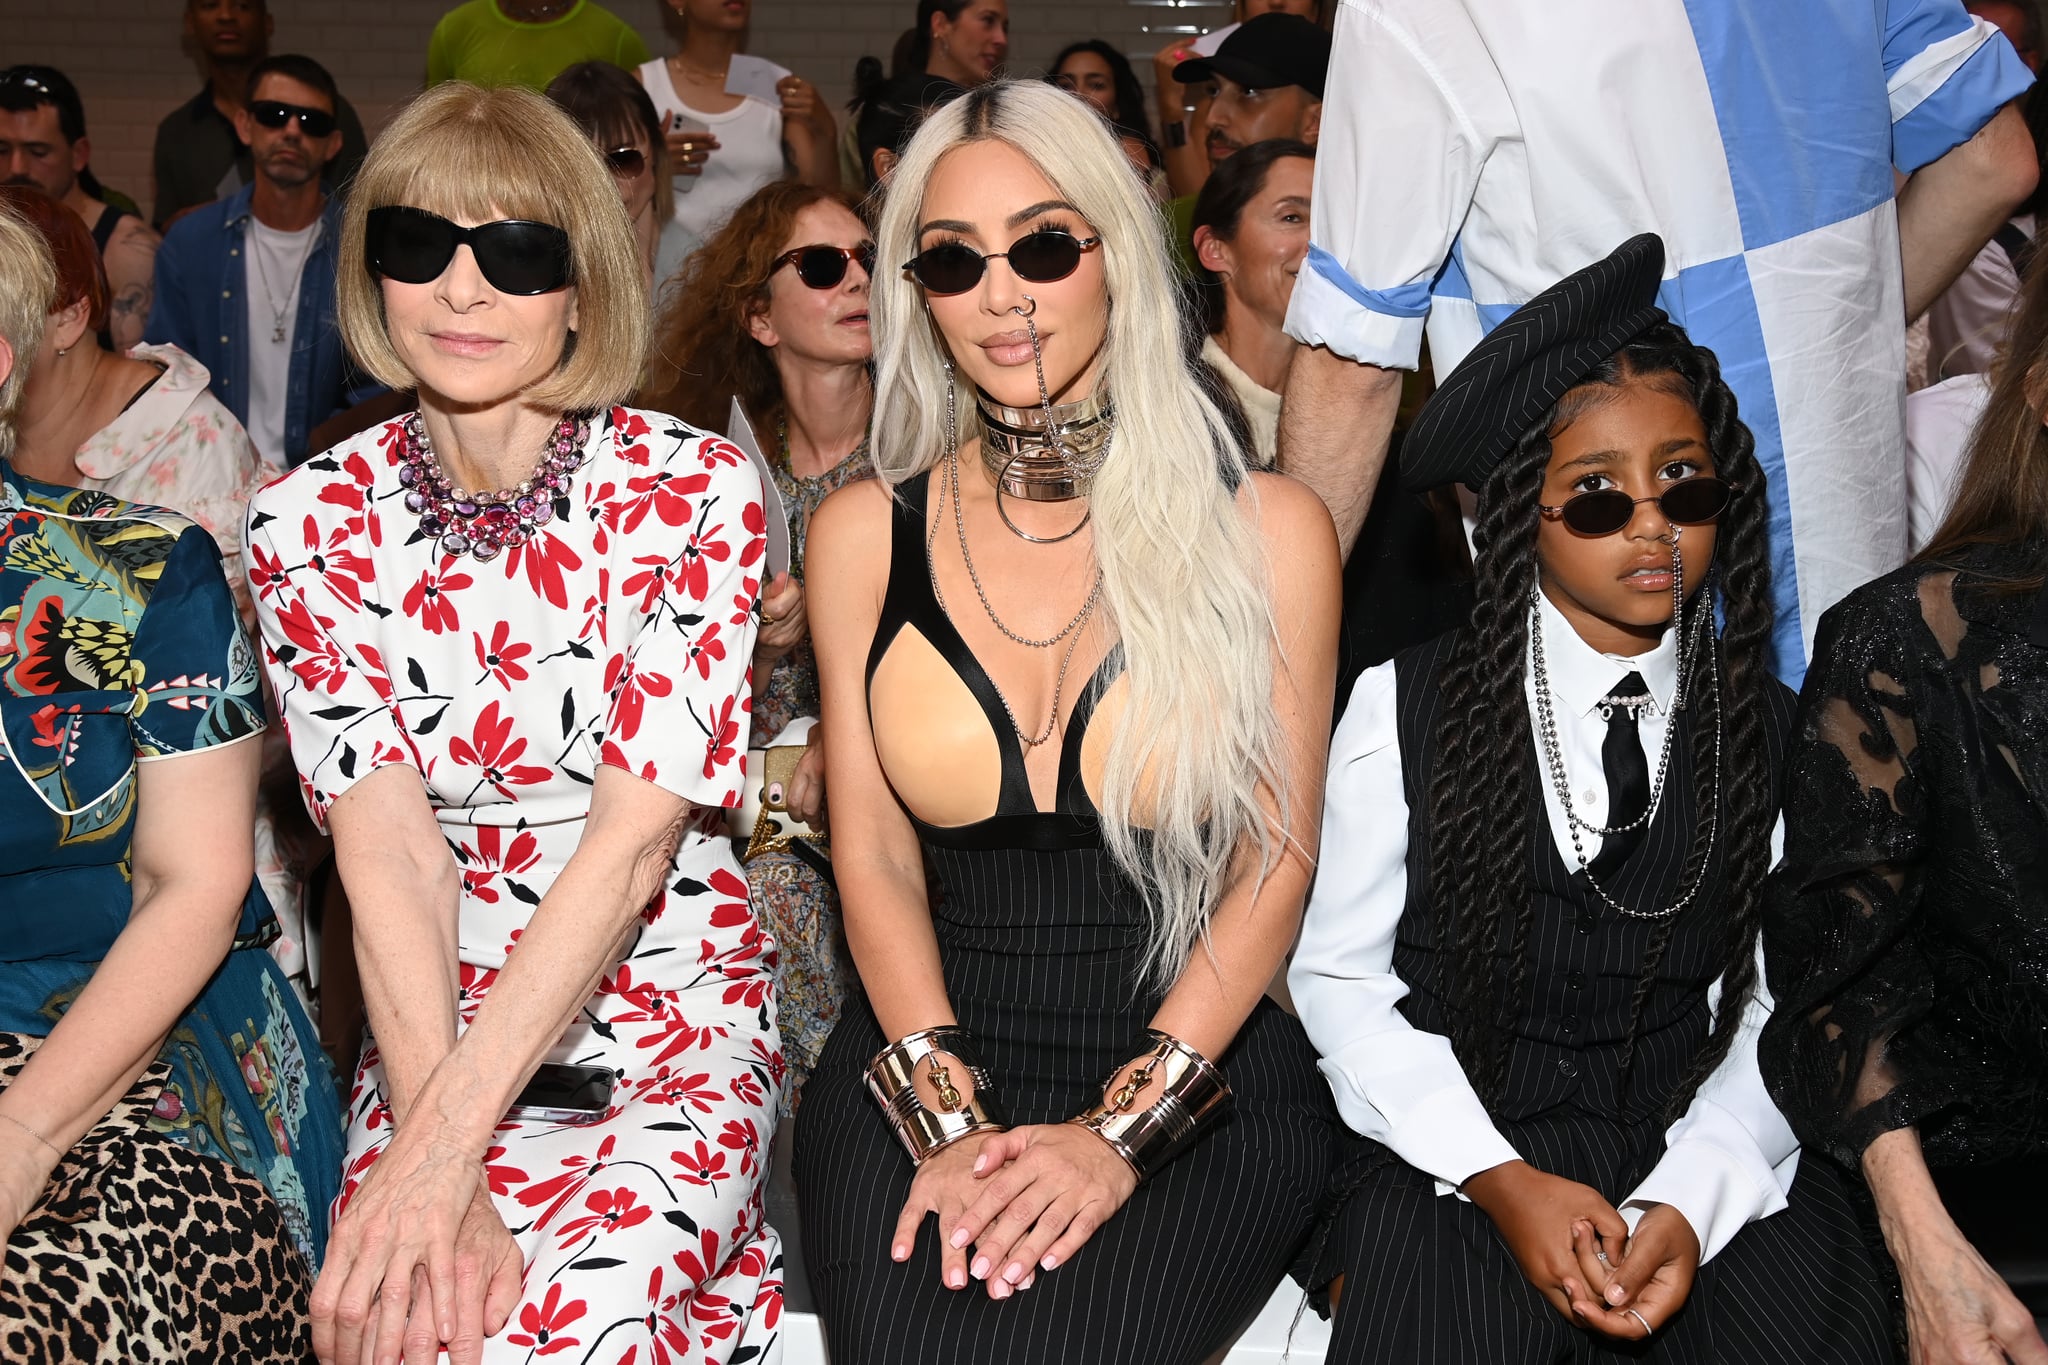 PARIS, FRANCE - JULY 06: (EDITORIAL USE ONLY - For Non-Editorial use please seek approval from Fashion House) (LR) Anna Wintour, Kim Kardashian and North West attend the Jean-Paul Gaultier Haute Couture Fall Winter 2022 2023 show as part of Paris Fashion Week on July 06, 2022 in Paris, France.  (Photo by Pascal Le Secret/Getty Images)